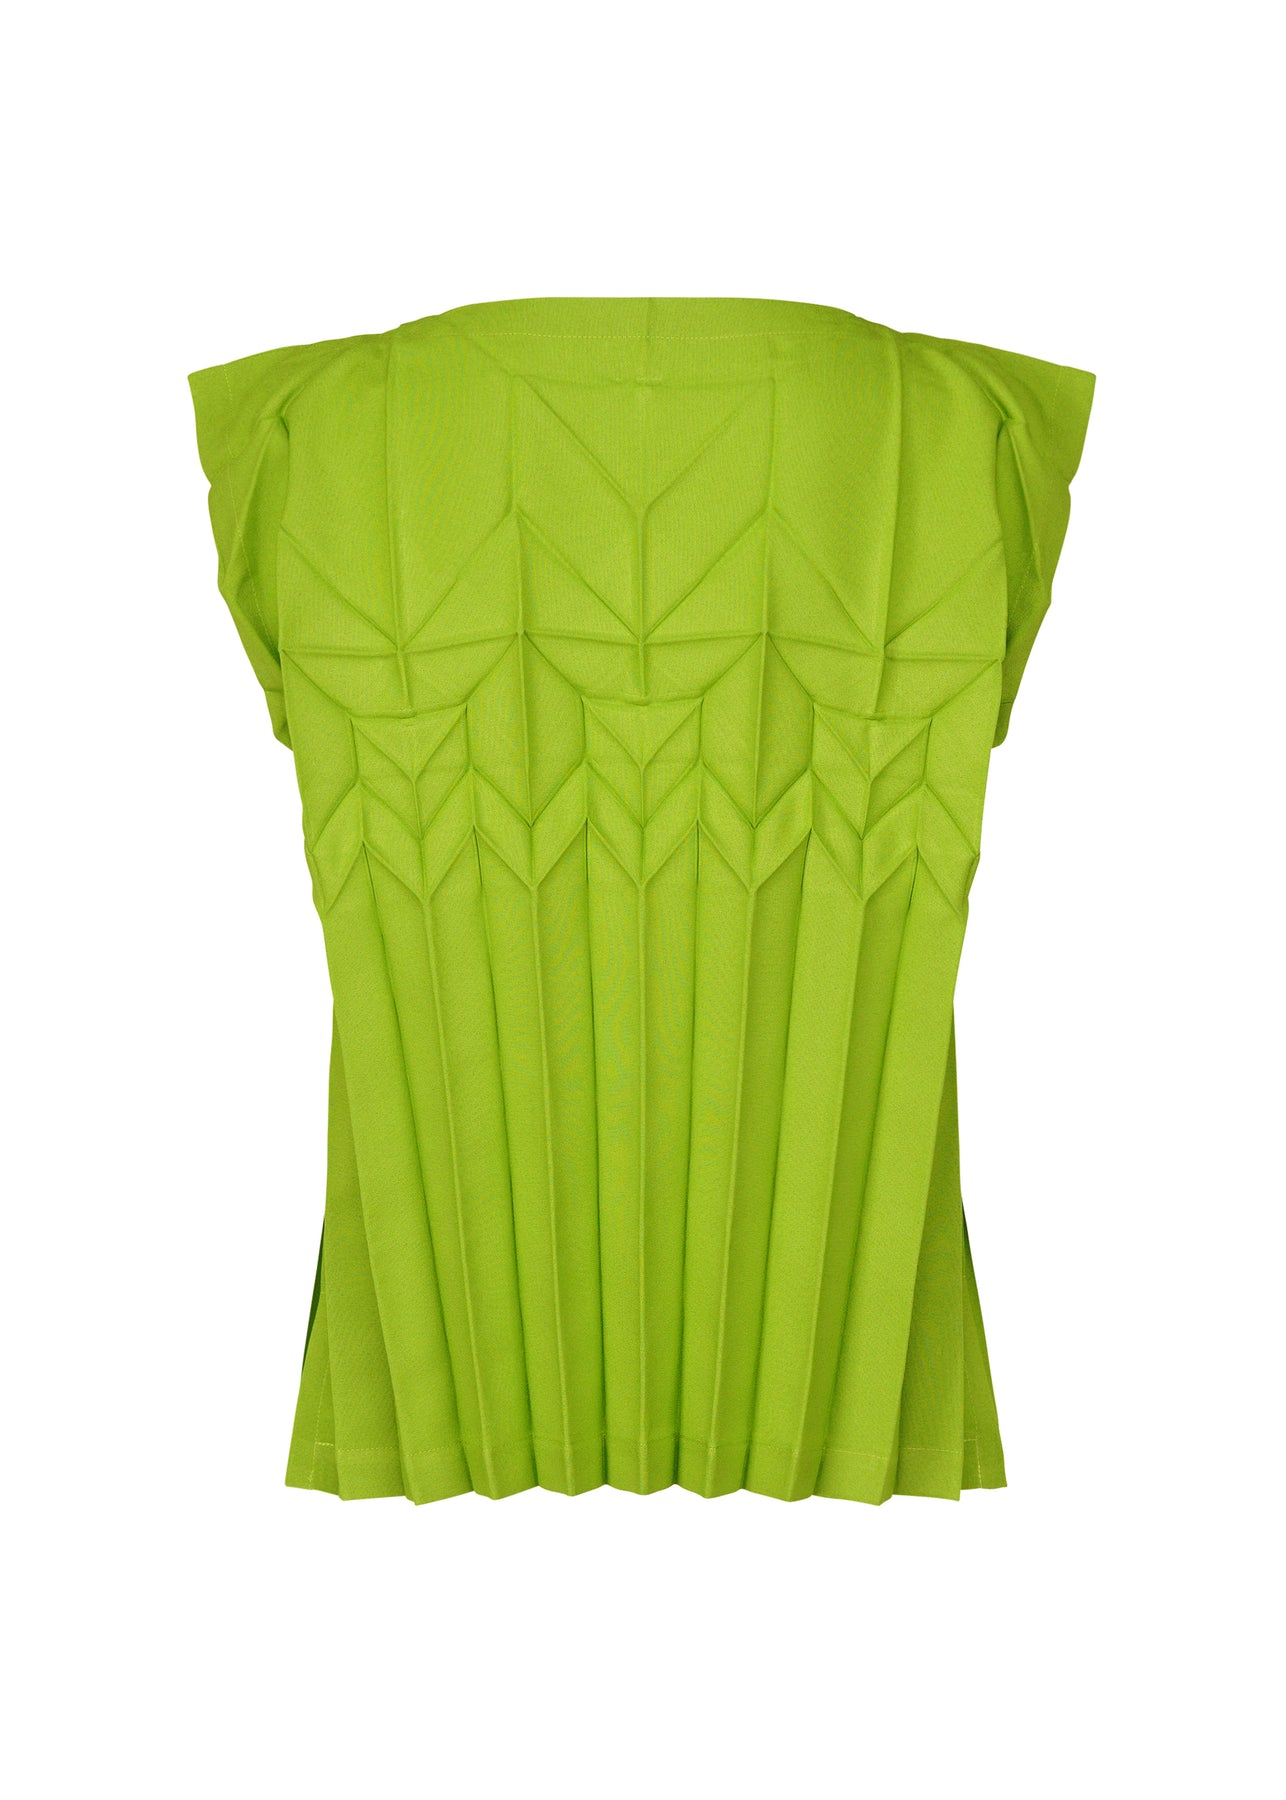 CUBE PLEATS TOP | The official ISSEY MIYAKE ONLINE STORE | ISSEY 